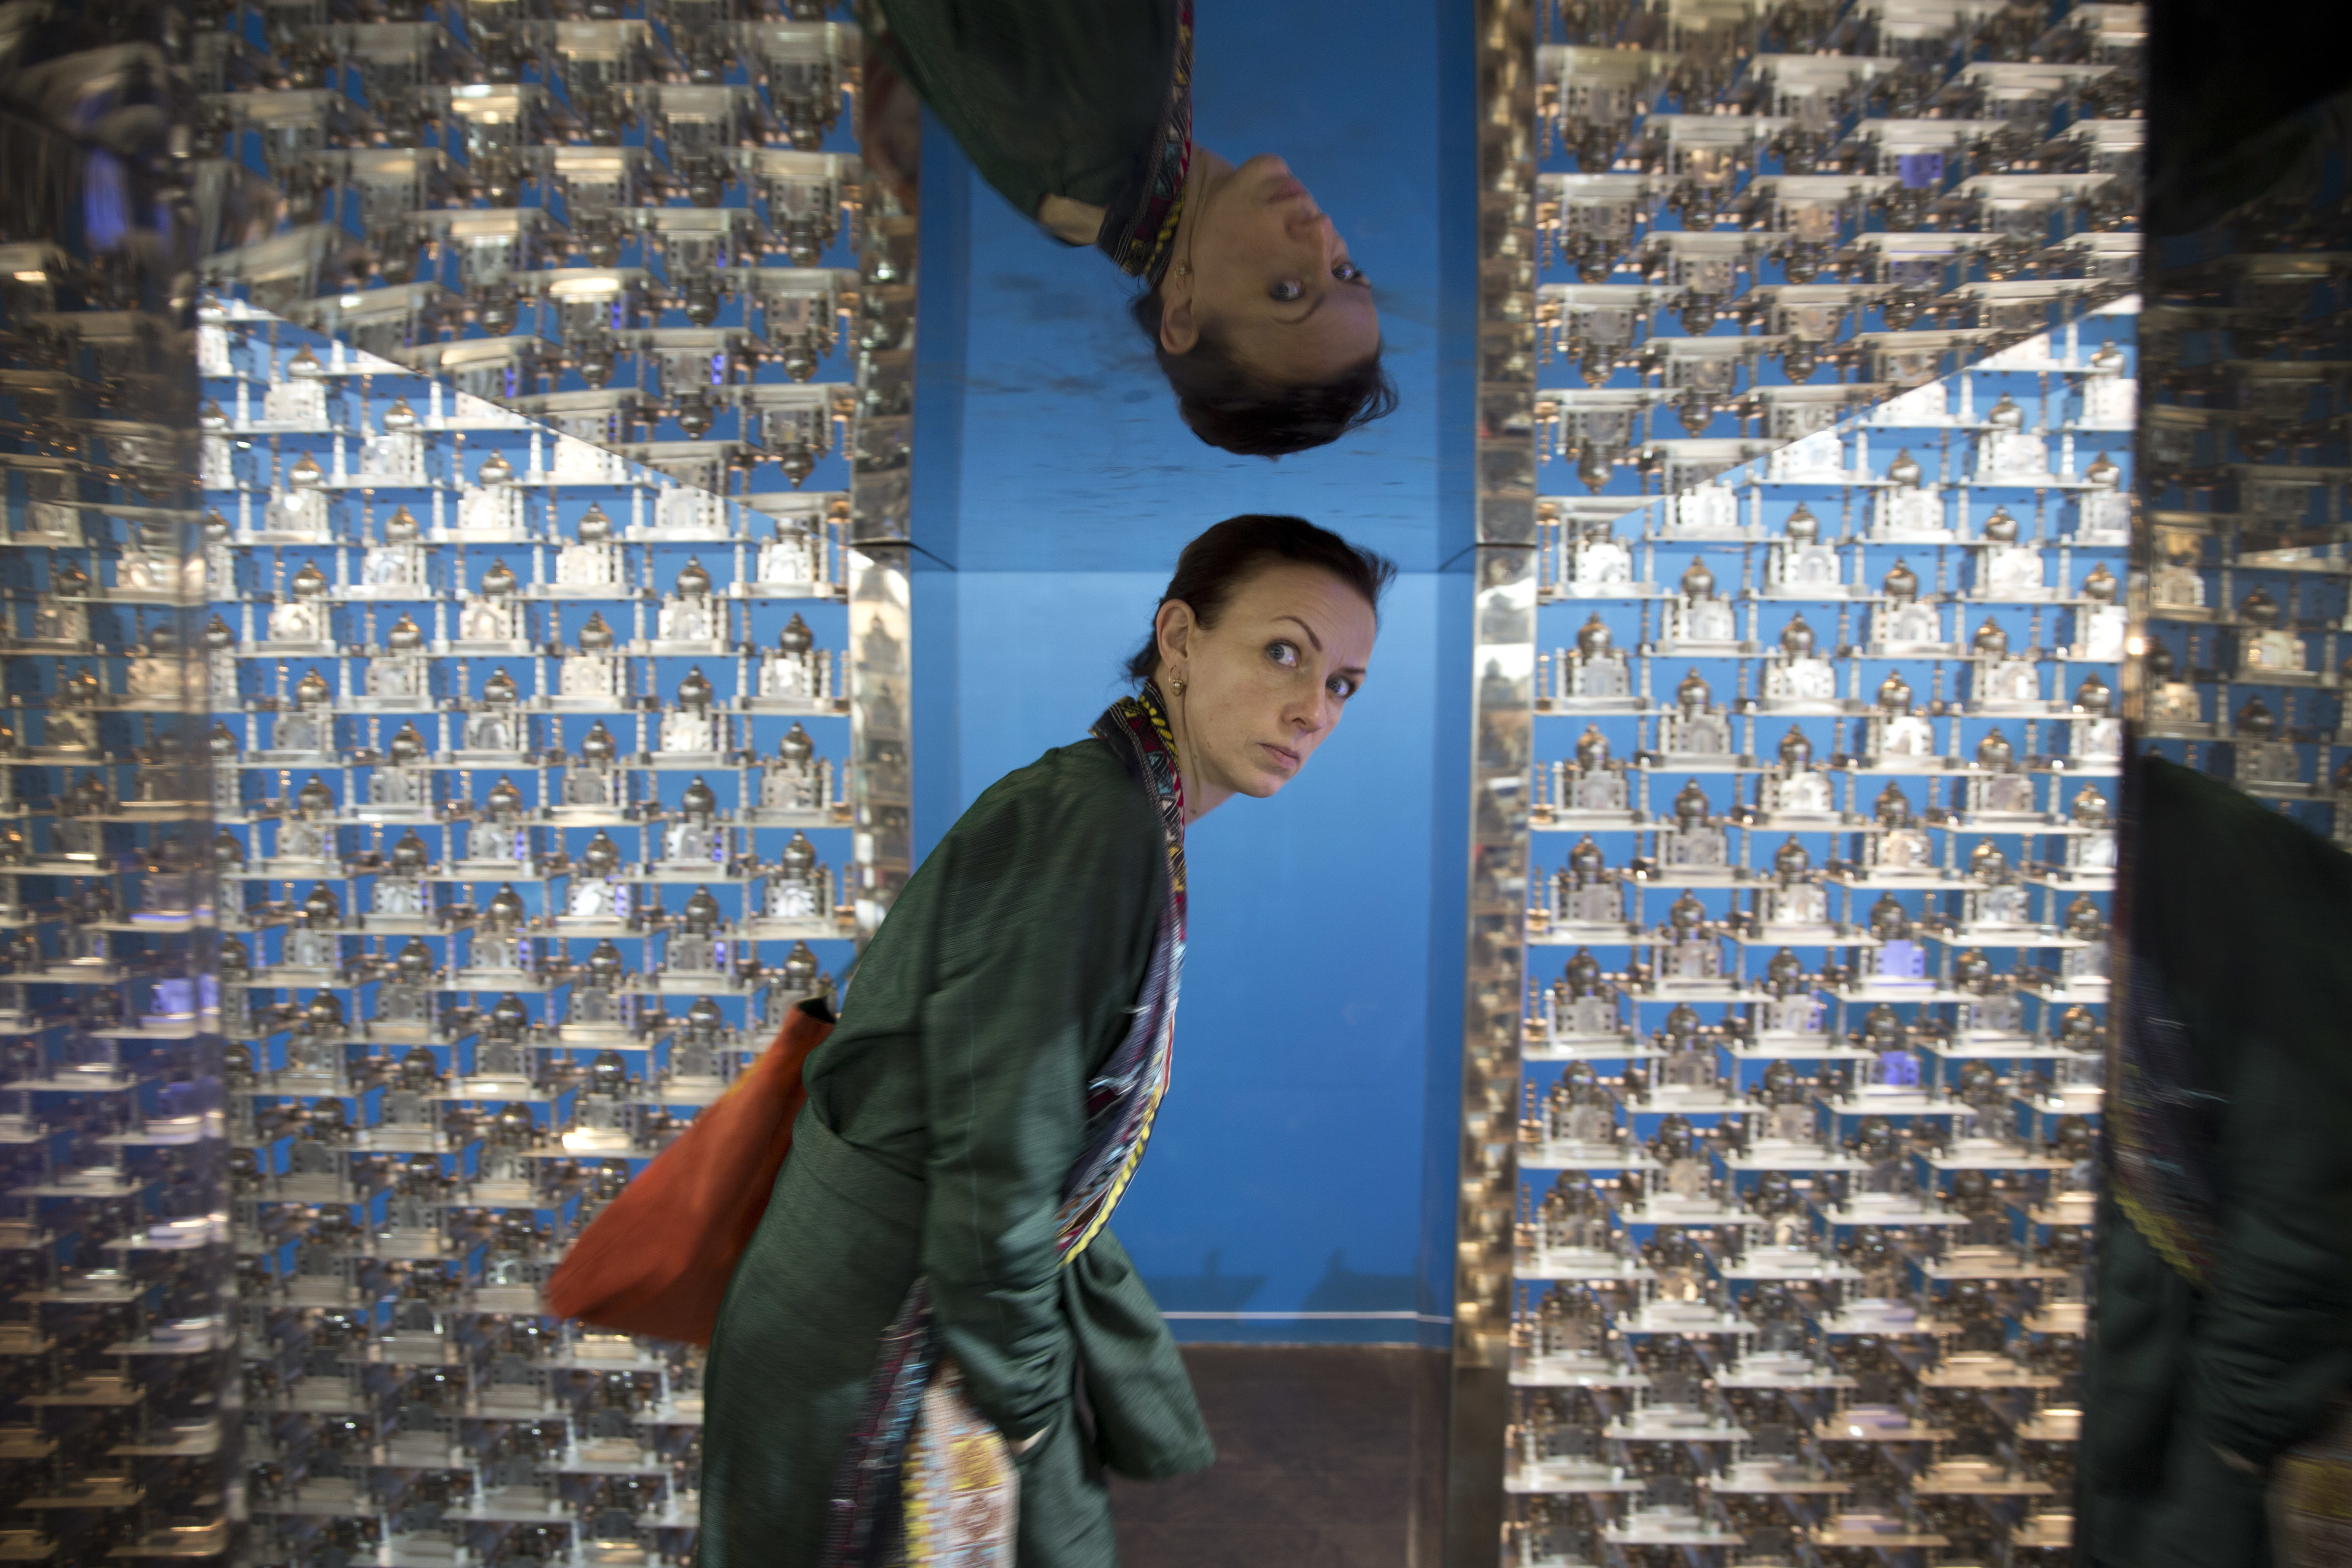 A woman looks inside an art installation titled Taj by Sudarshan Shetty during the India Art Fair in New Delhi, India, Thursday, Feb. 2, 2017. The four day art fair brings together a number of modern and contemporary artists to present their works. (AP Photo/Tsering Topgyal)